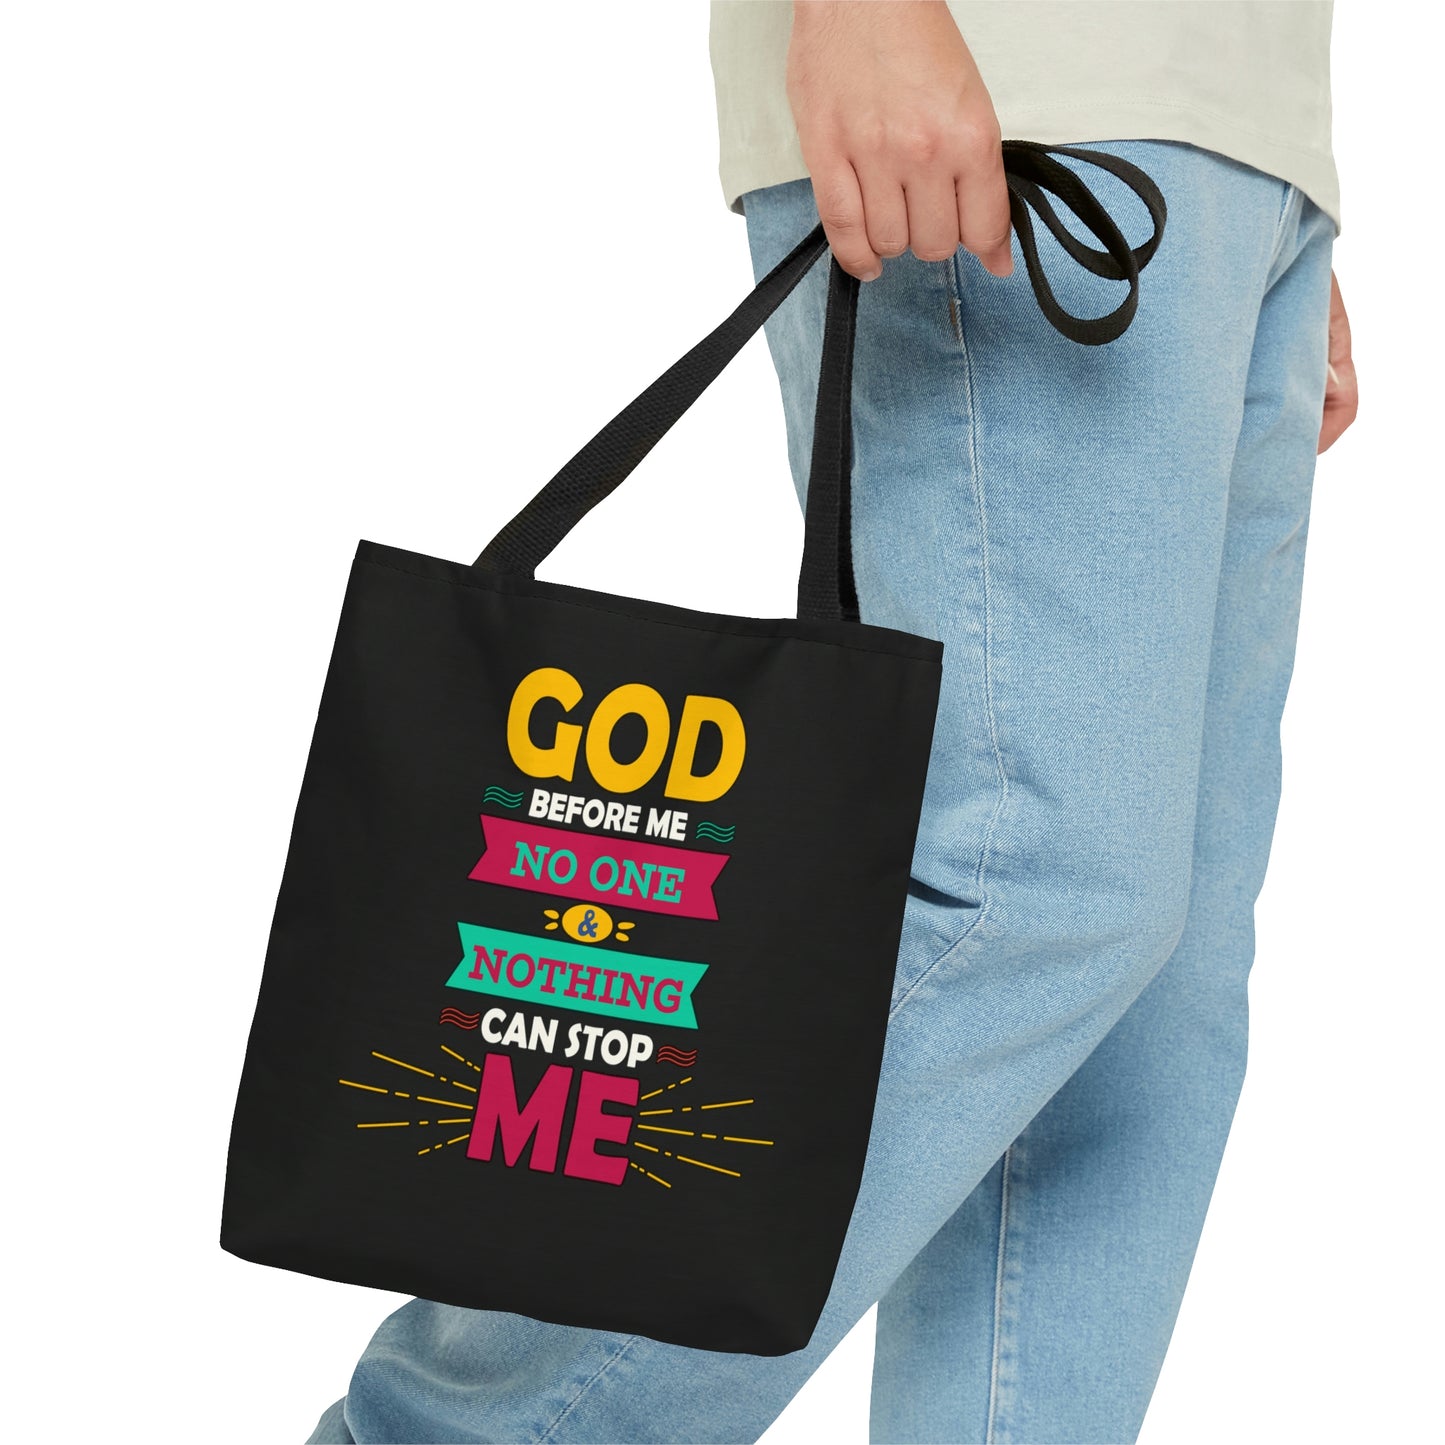 God Before Me No One & Nothing Can Stop Me Tote Bag